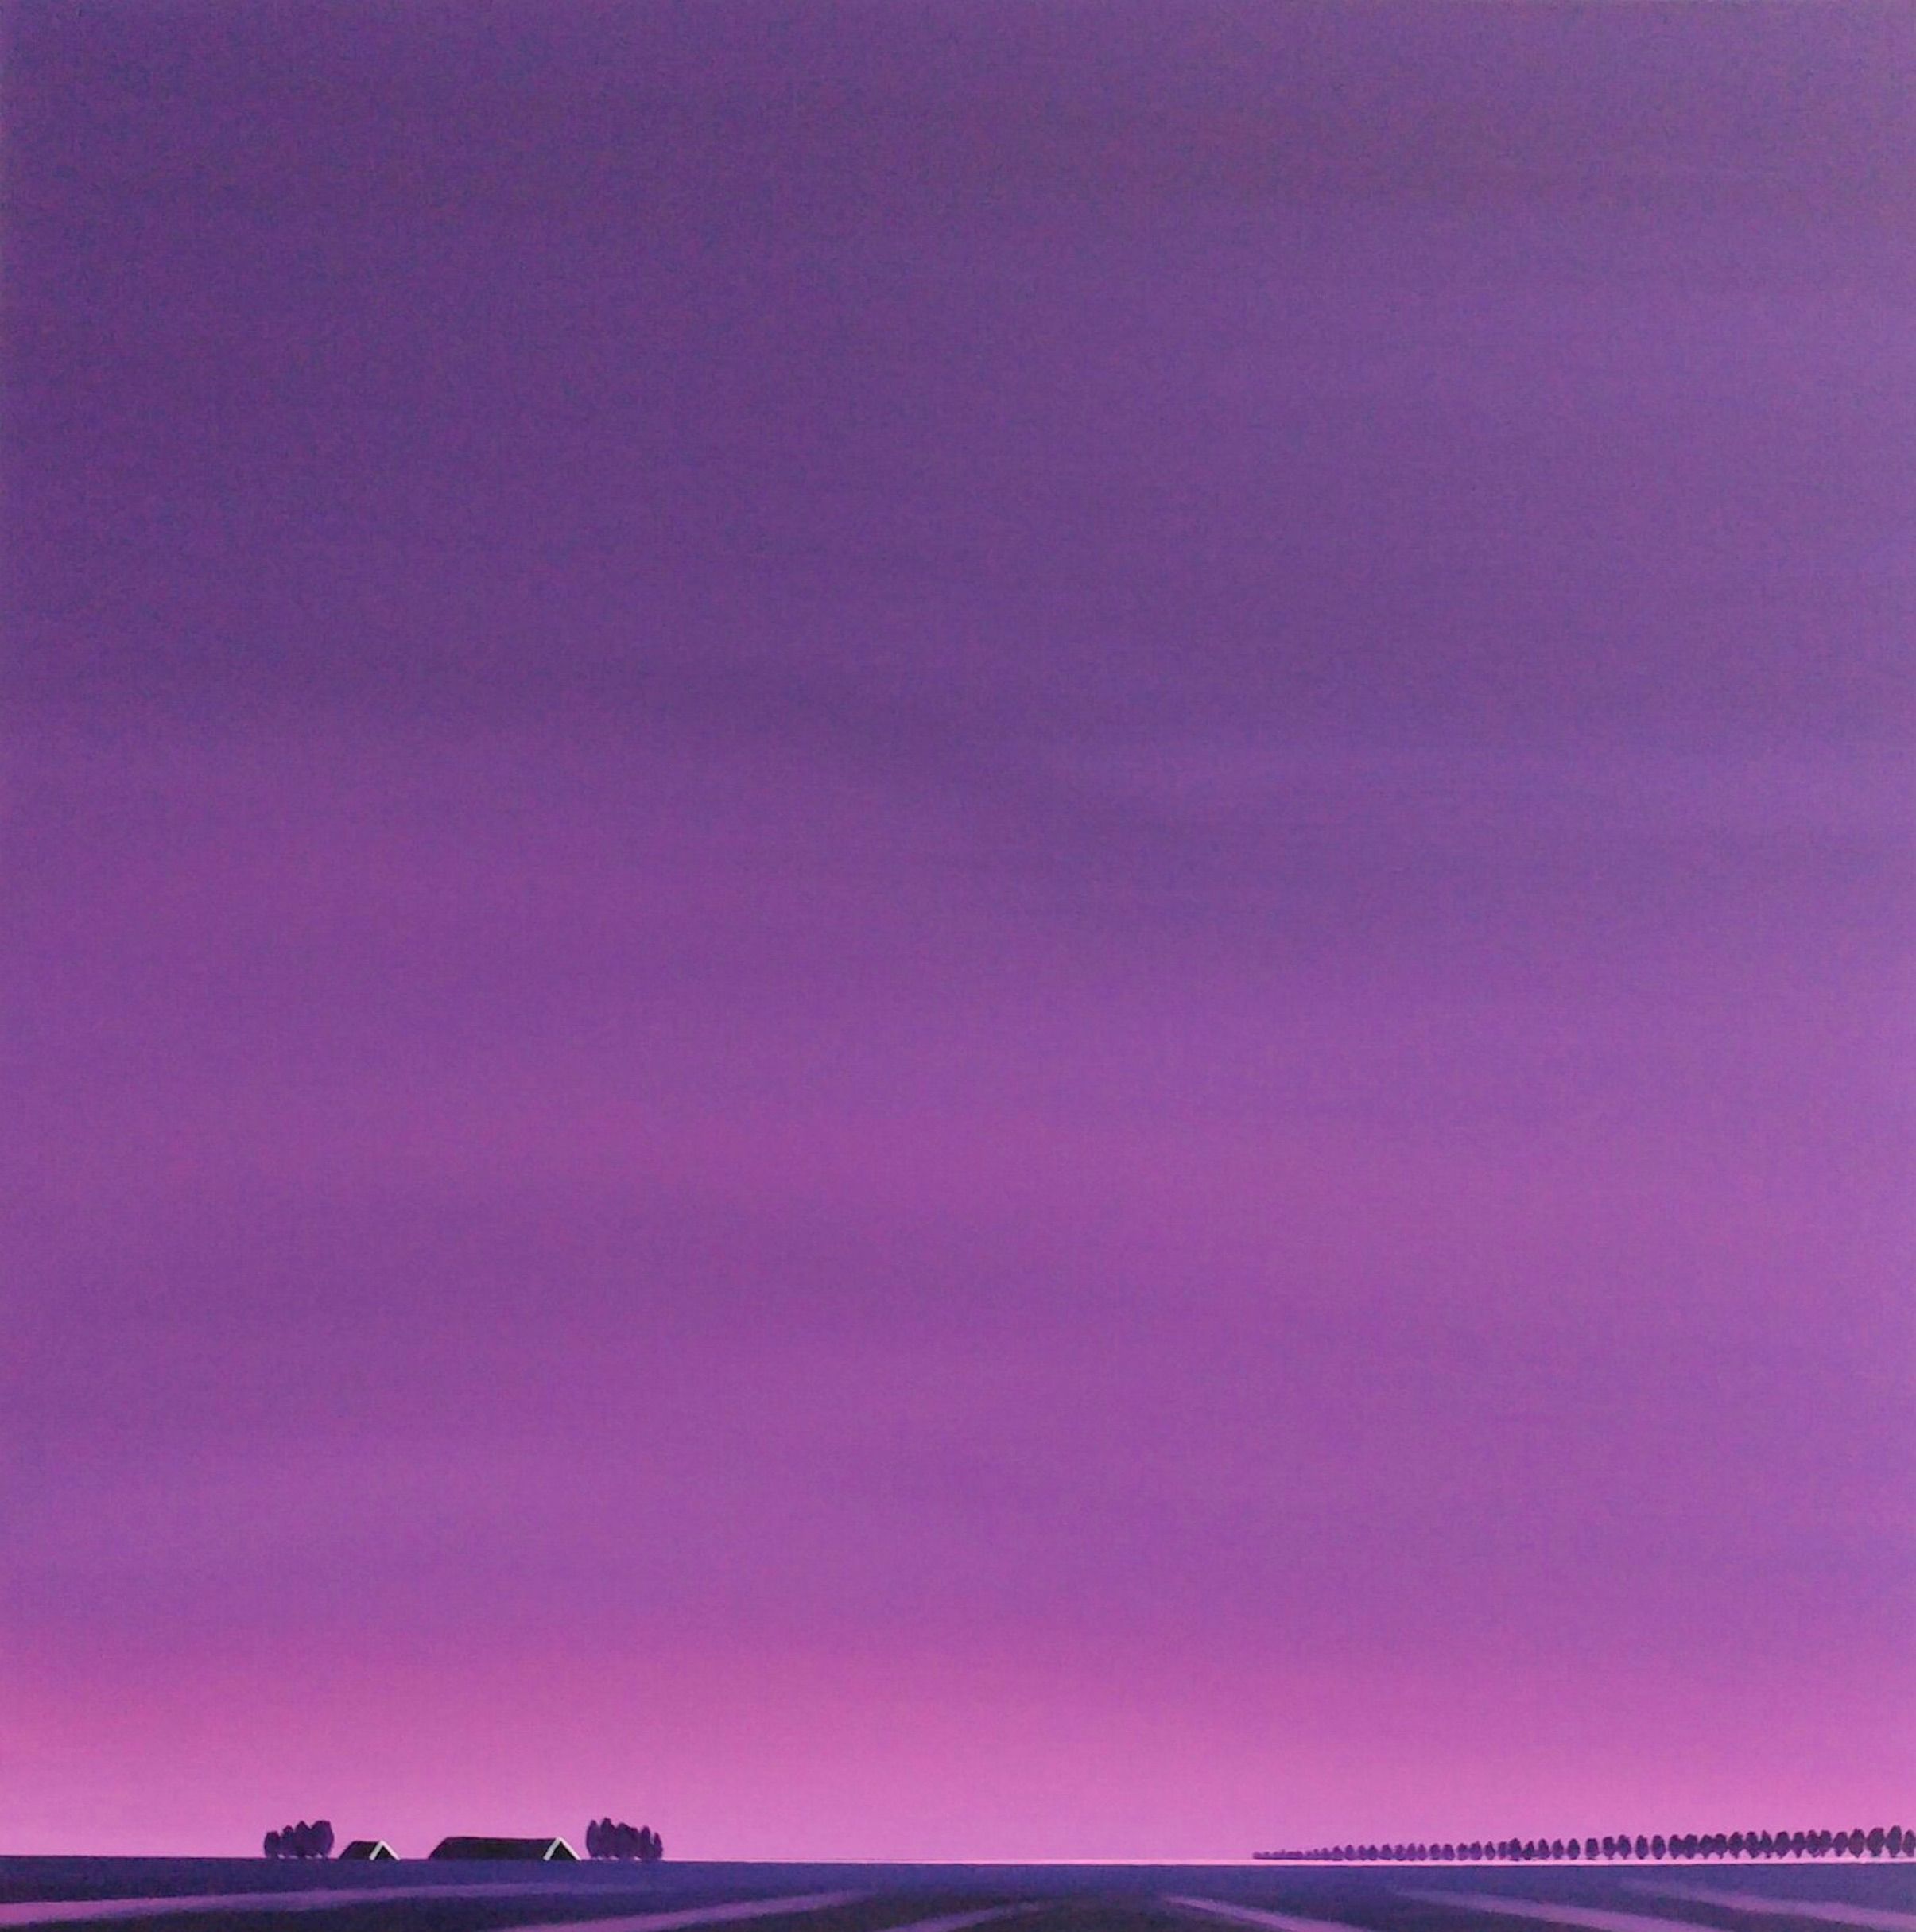 Nelly van Nieuwenhuijzen's "Dageraad, goodbye to the night" painting shows a landscape in Zeeland. The purple sky, a pinkish purple sunrise reflected in the tracks on the land and the dark roofs, is intense, almost overwhelming